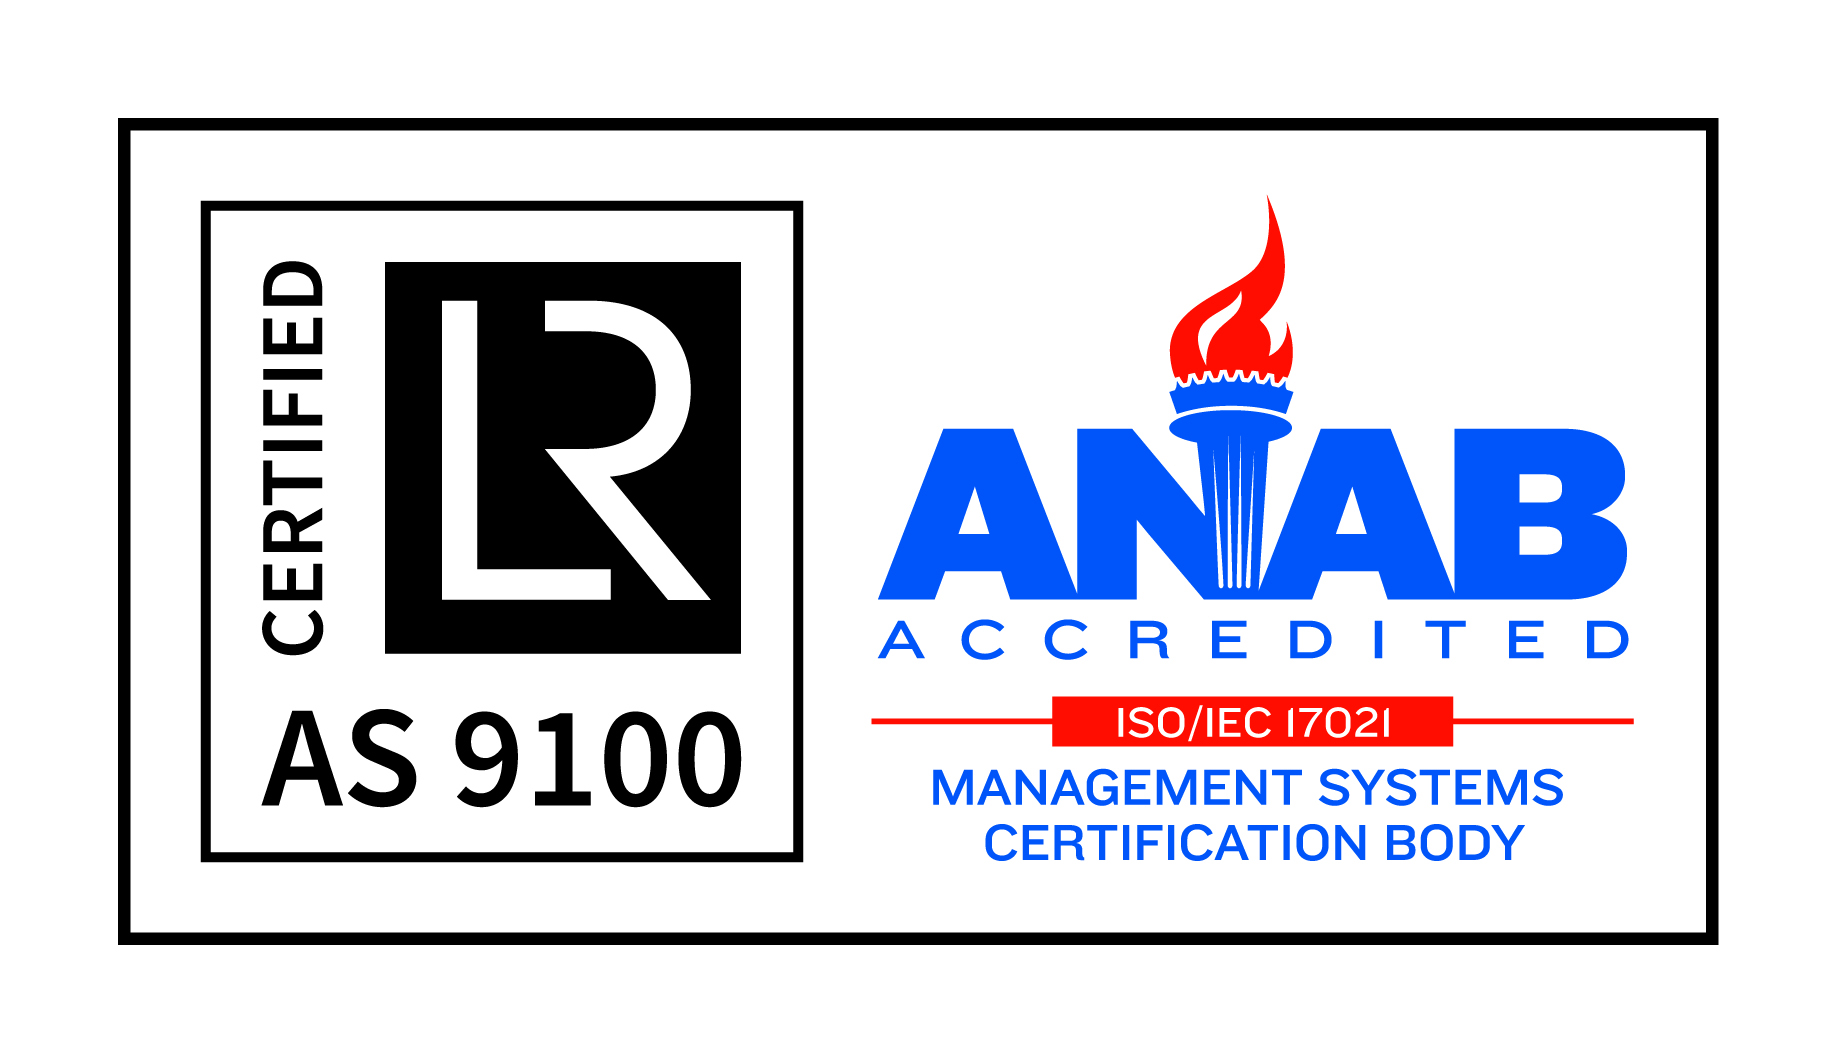 AS 9100 and ANAB logo